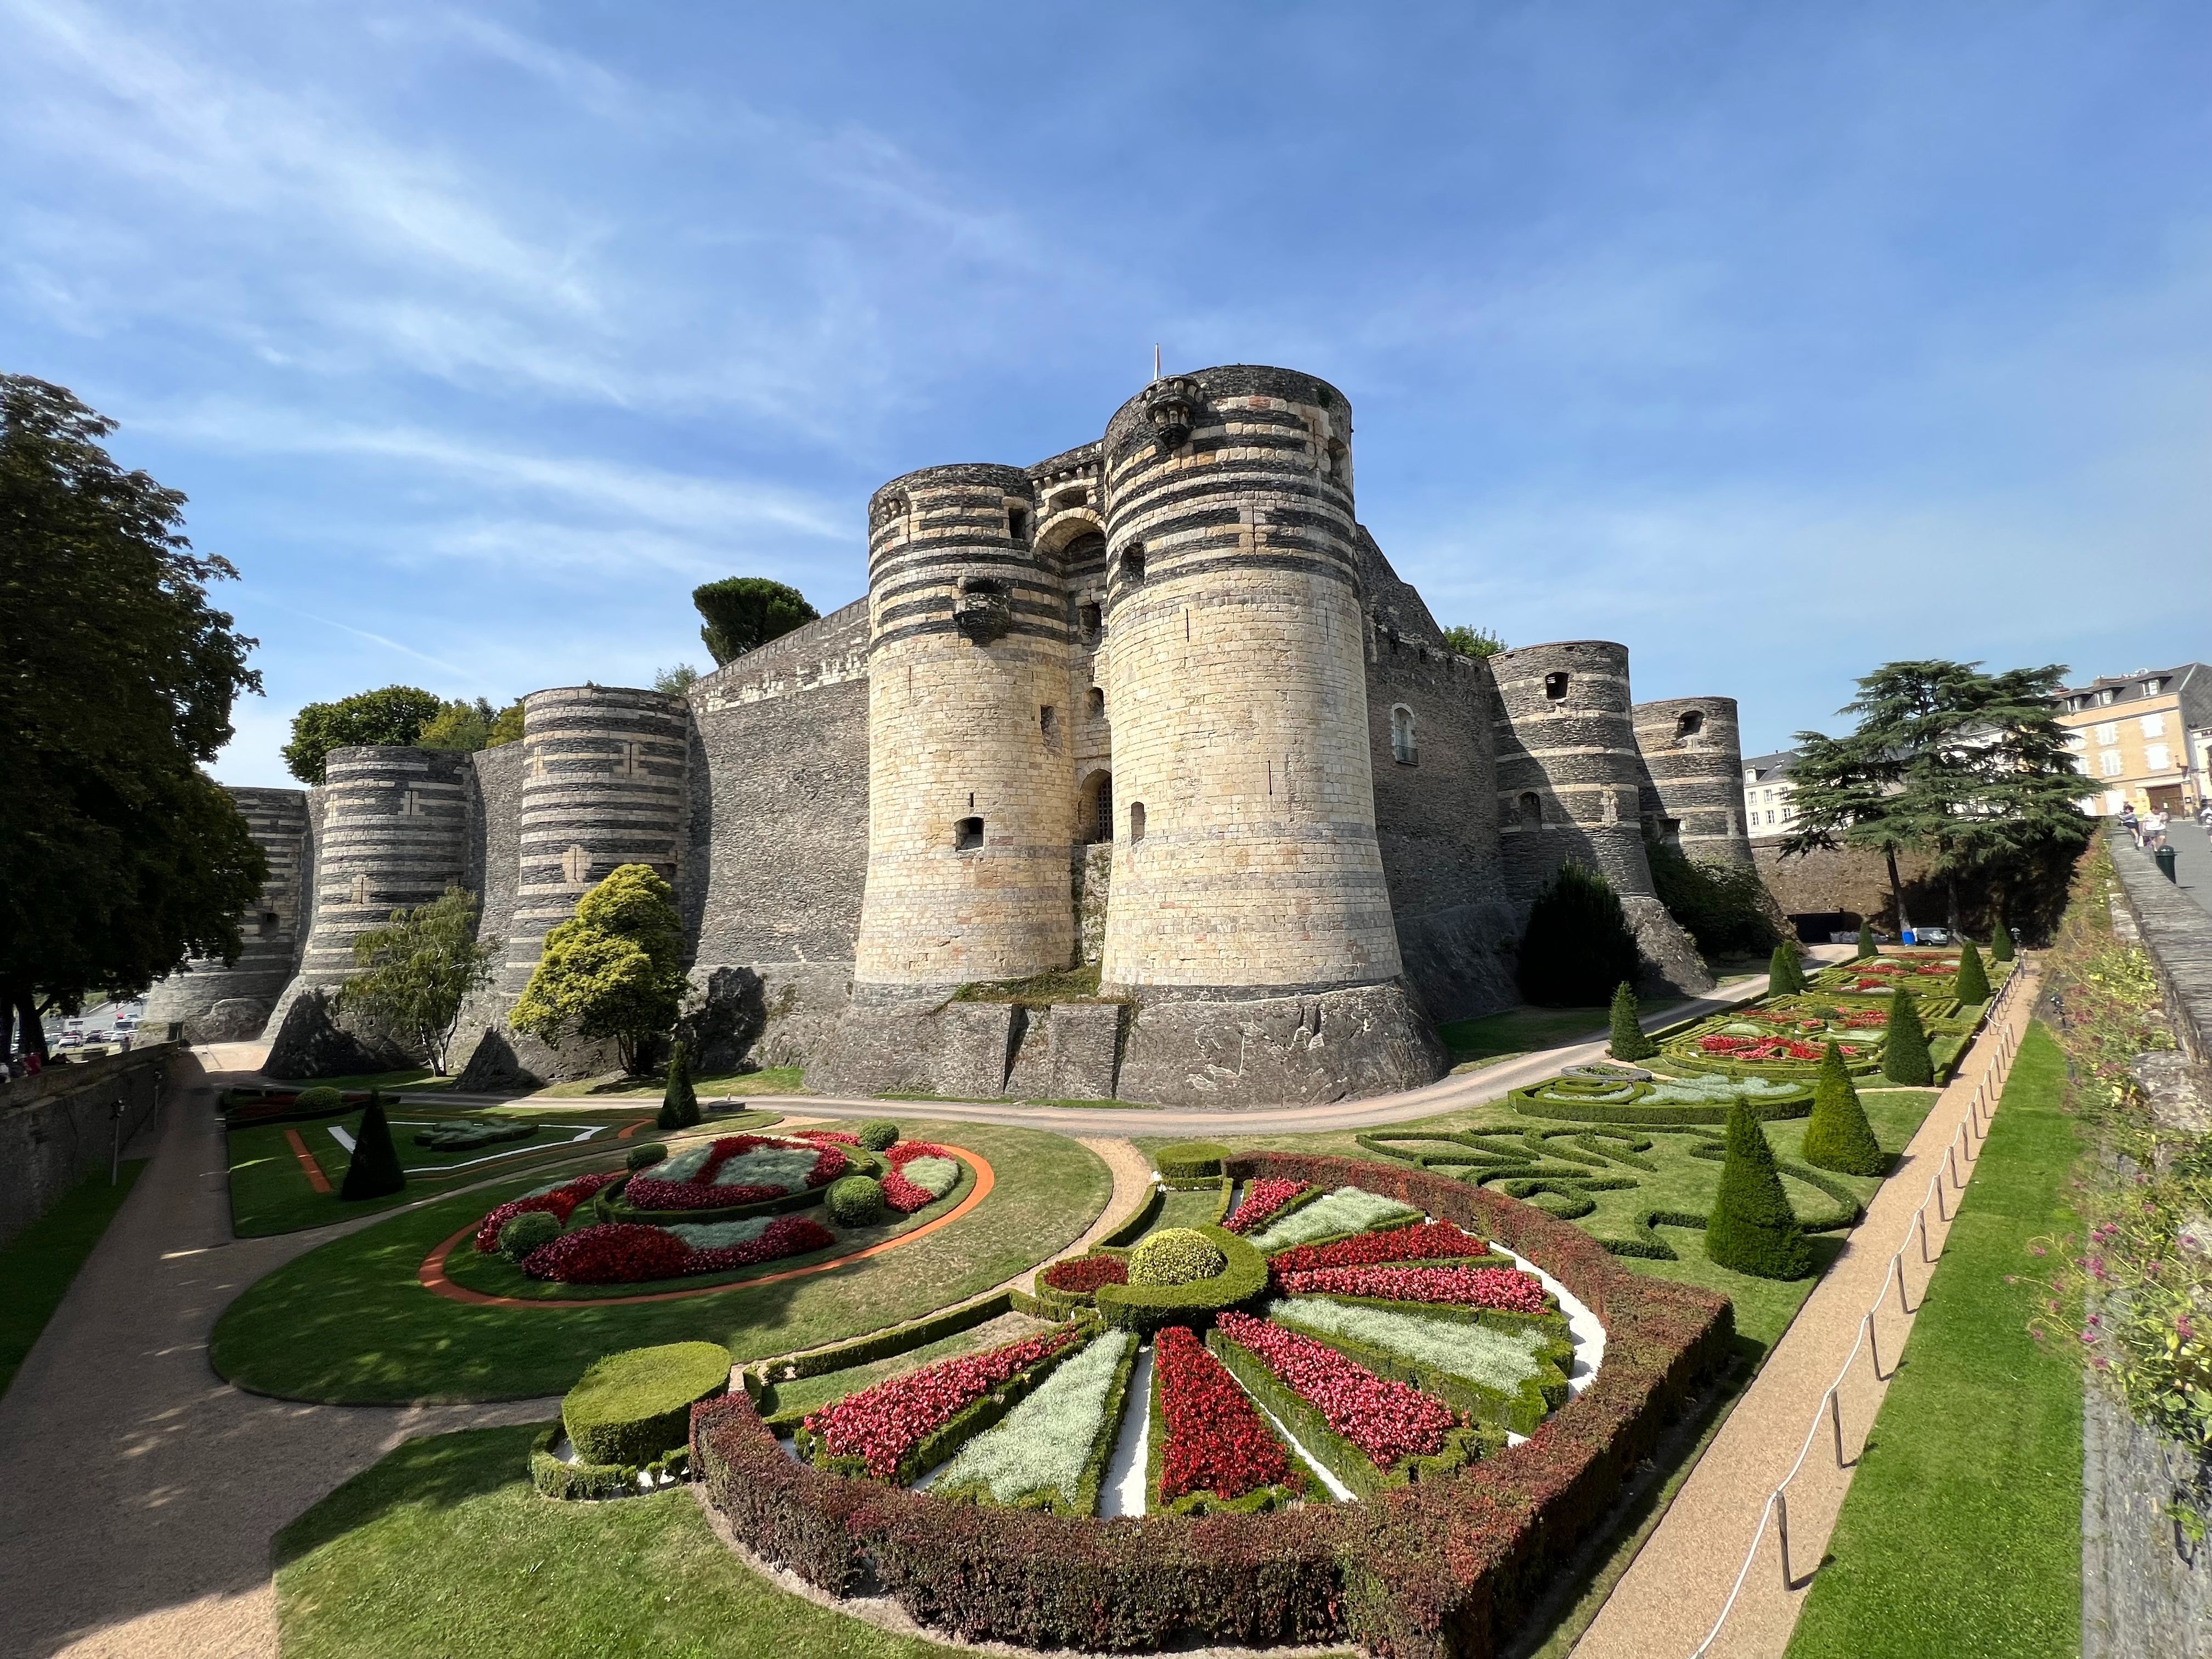 Château de Angers in day, with gardens and fortress visible